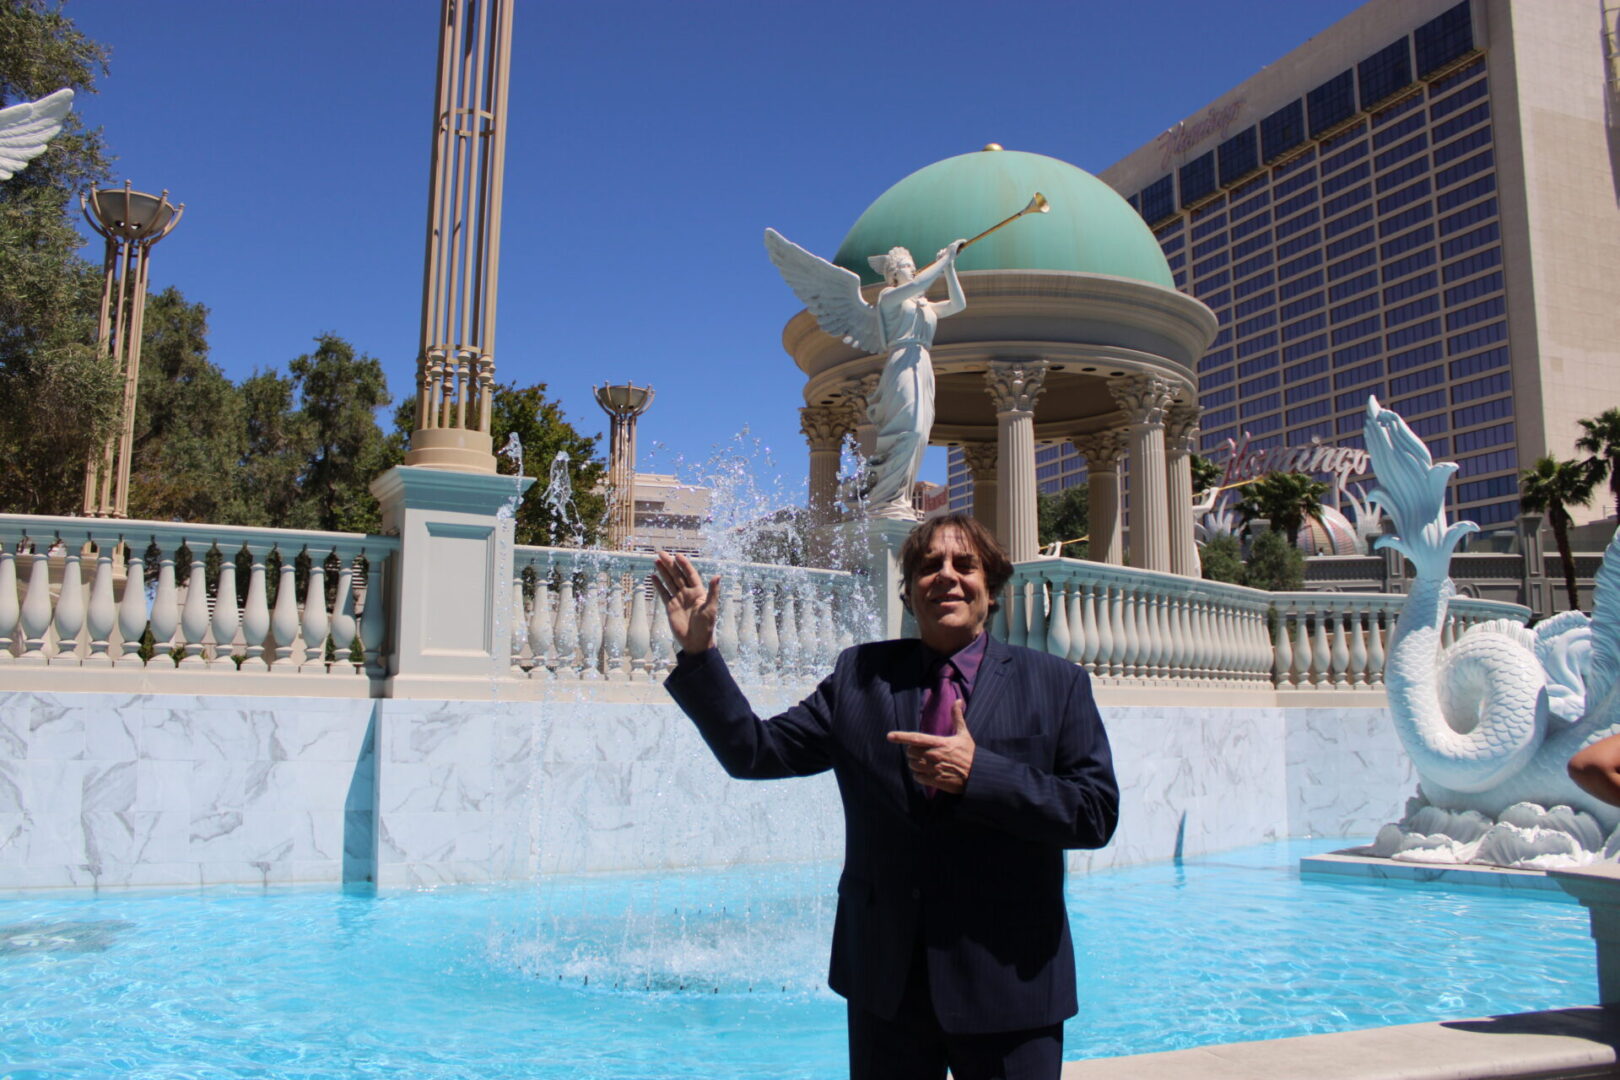 A man in a suit and tie standing next to a pool.